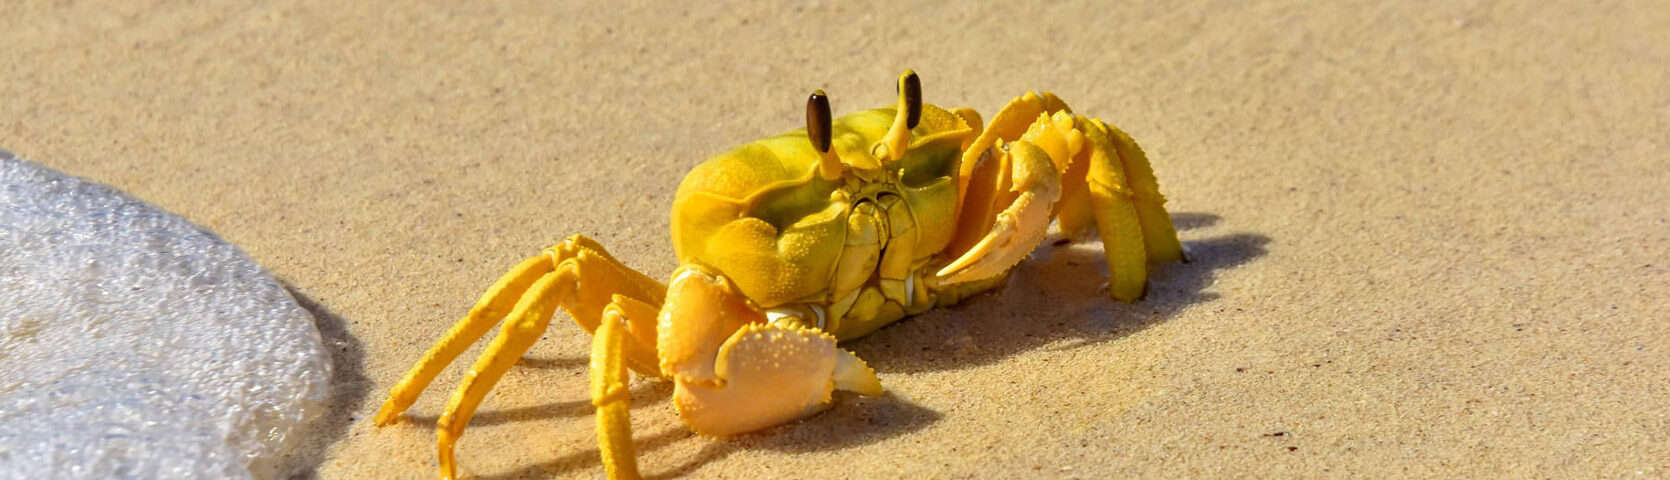 Abrolhos-Islands-and-the-Coral-Coast-Cruise-Yellow-Ghost-Crab-jlo